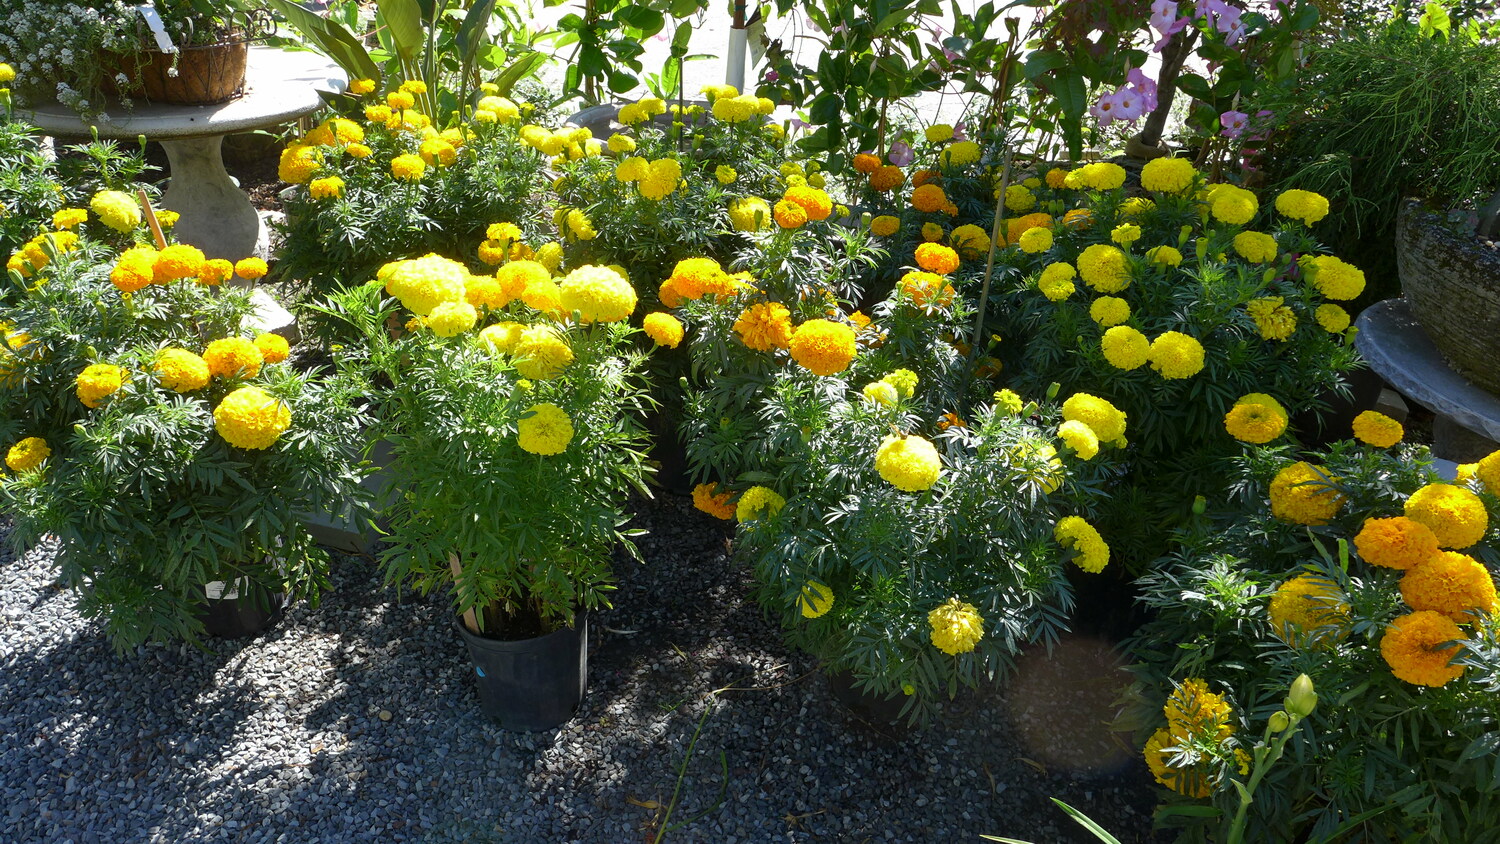 As we get later into the season, large pots of taller marigolds will show up at garden centers. These appeal to weekenders who want instant size and color but you have to pay dearly for the large, established plants. ANDREW MESSINGER